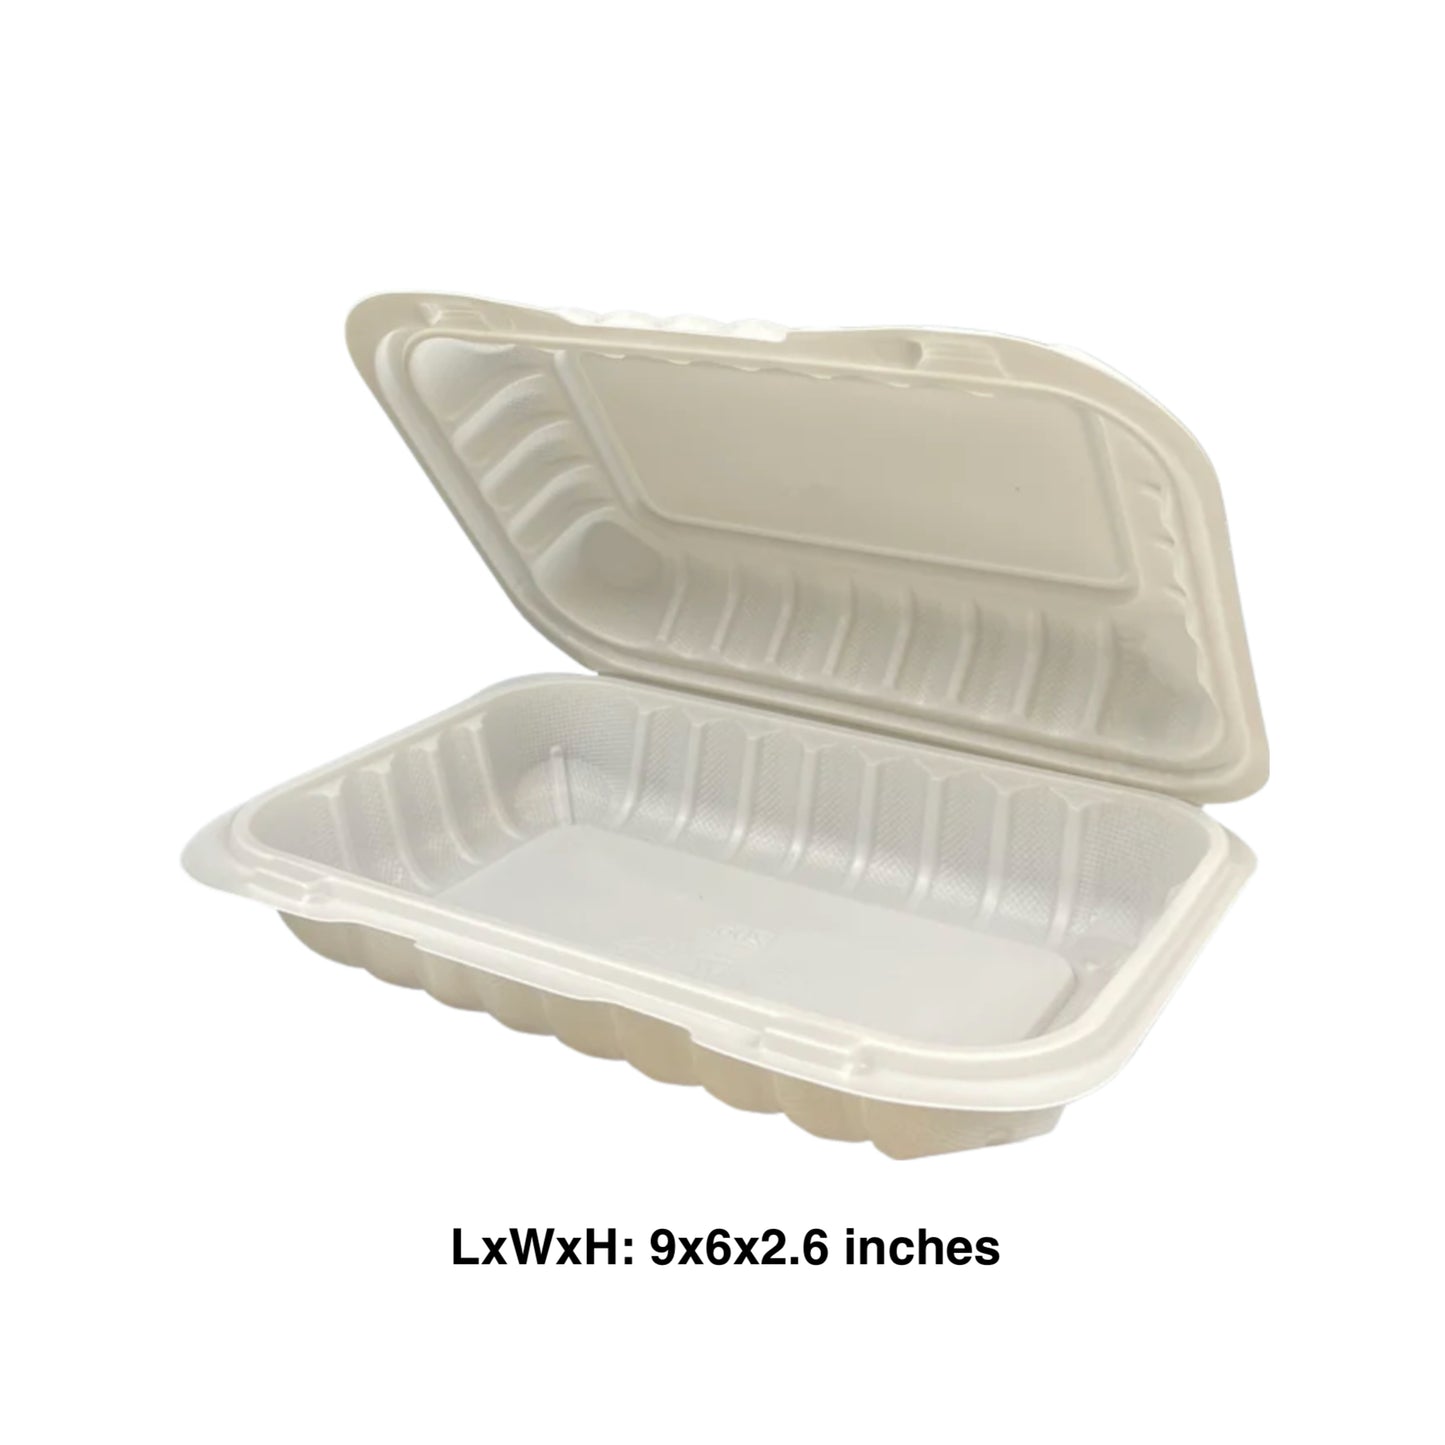 KIS-PP206G | 9x6x2.6 inches, 1-Compartment, PP Clamshell Food Container; $0.203/pc